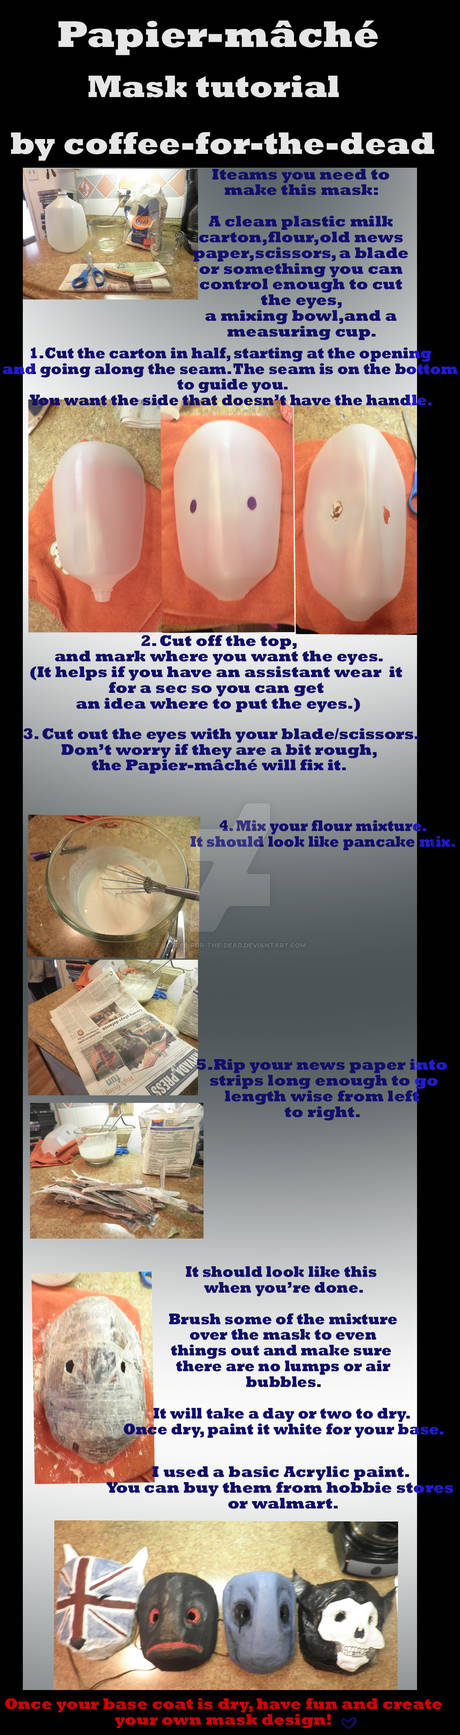 How To Make A Paper Mache Mask